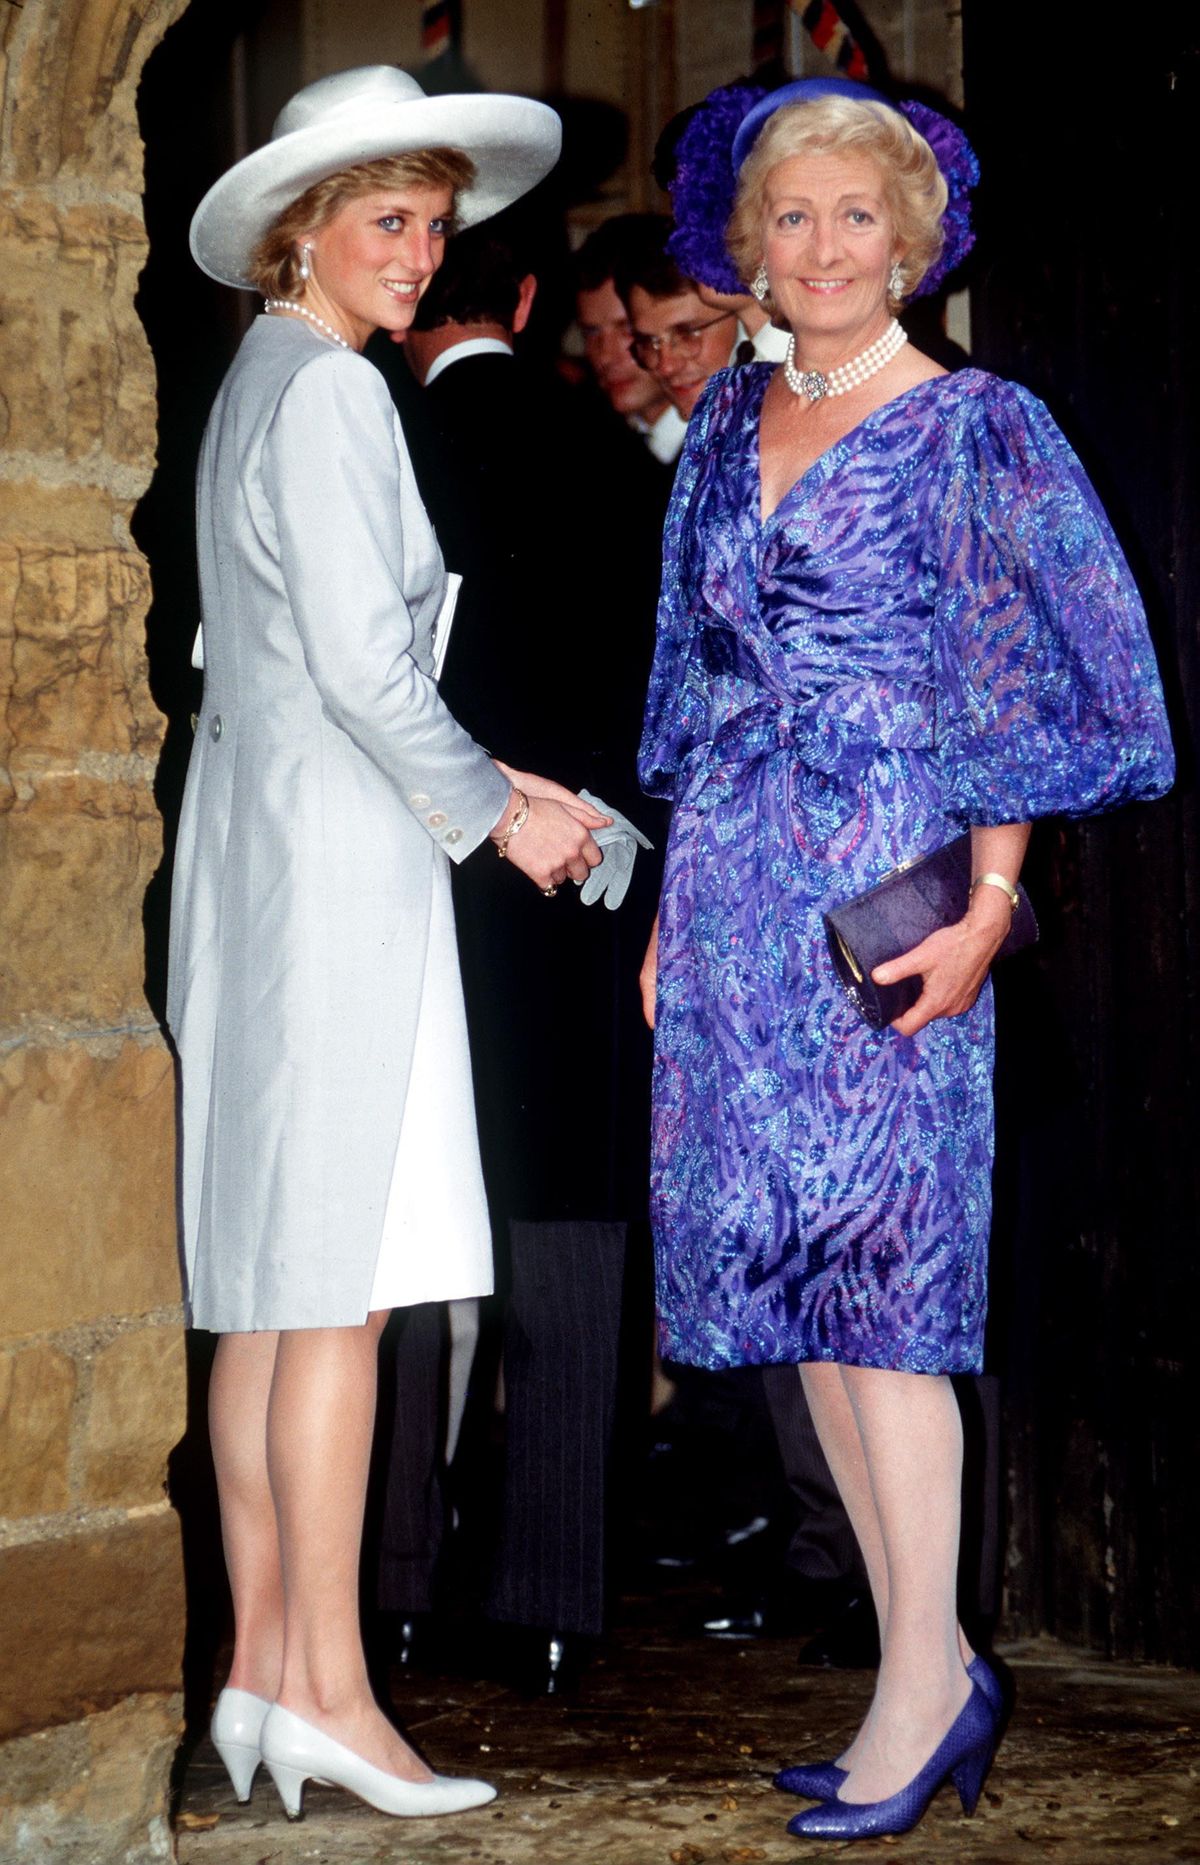 great brington, united kingdom   september 16  princess diana with her mother, mrs france shand kydd, attending the wedding of viscount and viscountess althorp at the church of st mary the virgin in great brington near the althorp family home  the princess is wearing a dove grey suit designed by catherine walker  photo by tim graham photo library via getty images